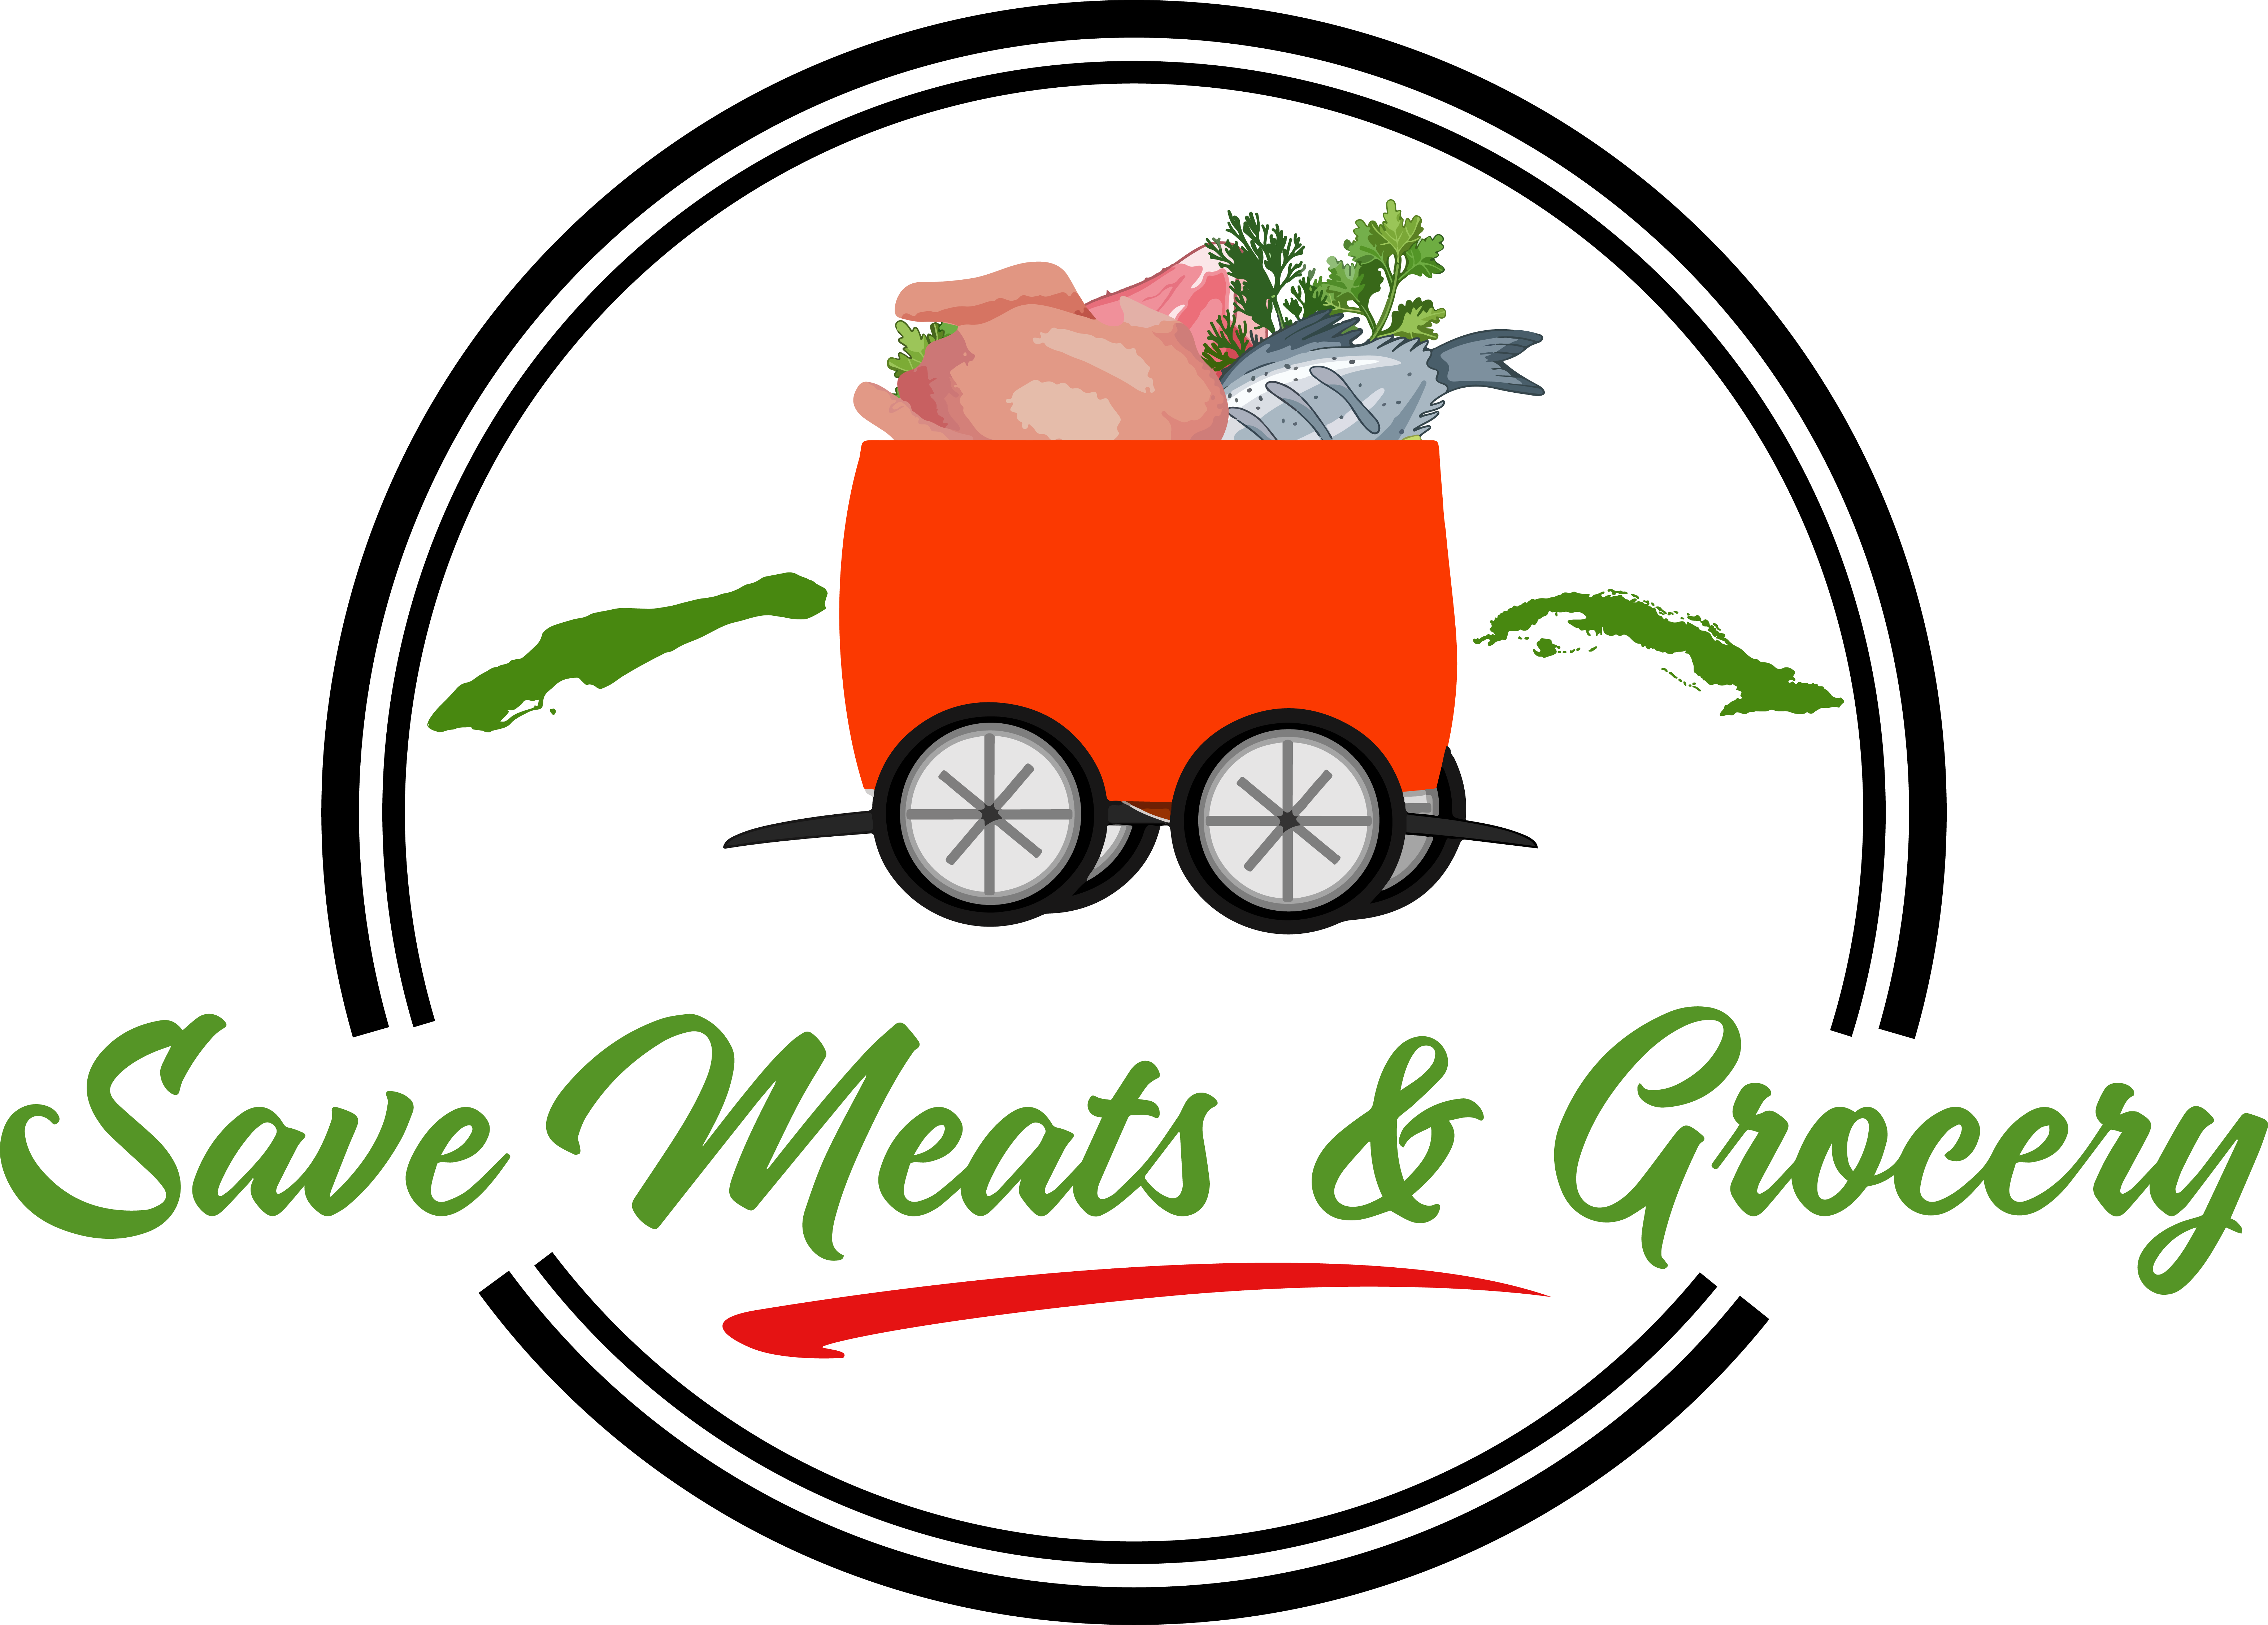 Your grocery shopping store and online delivery for Grand Cayman, Cayman Brac and Little Cayman, we serve all three Cayman Islands